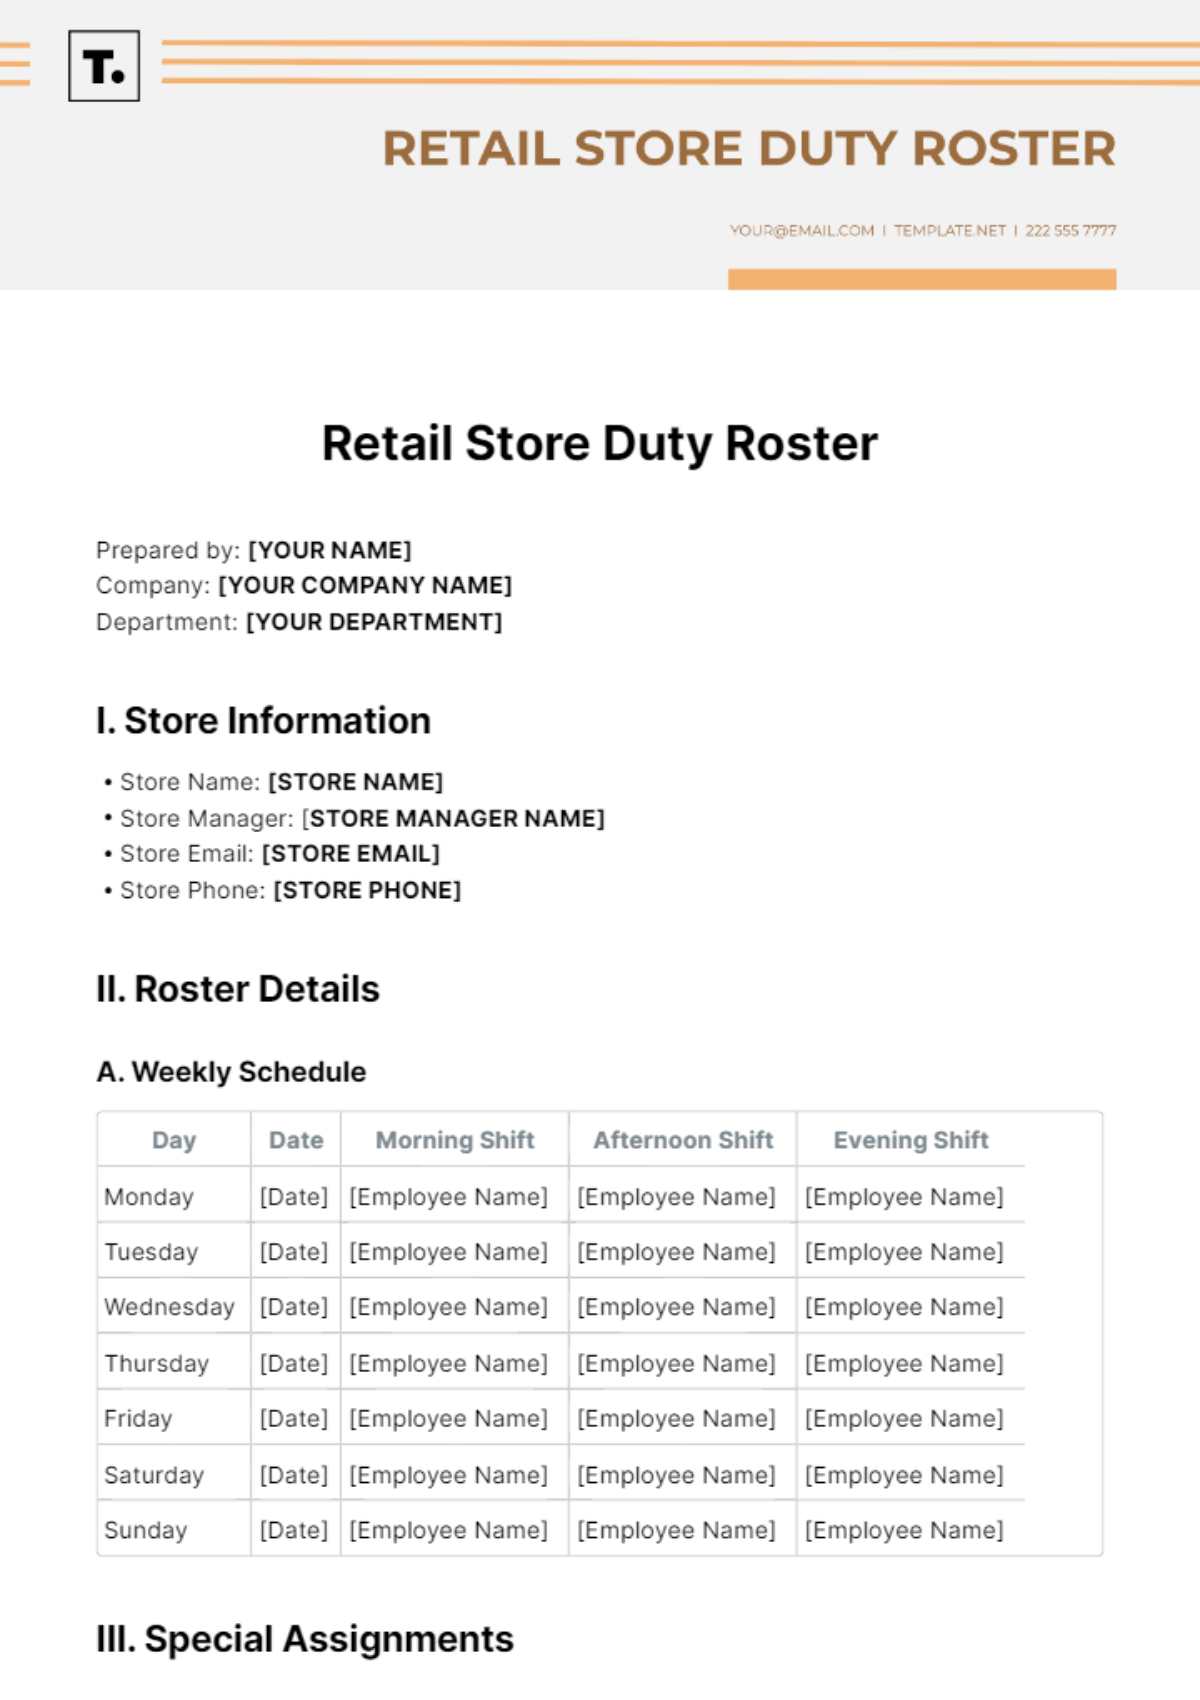 Retail Store Duty Roster Template